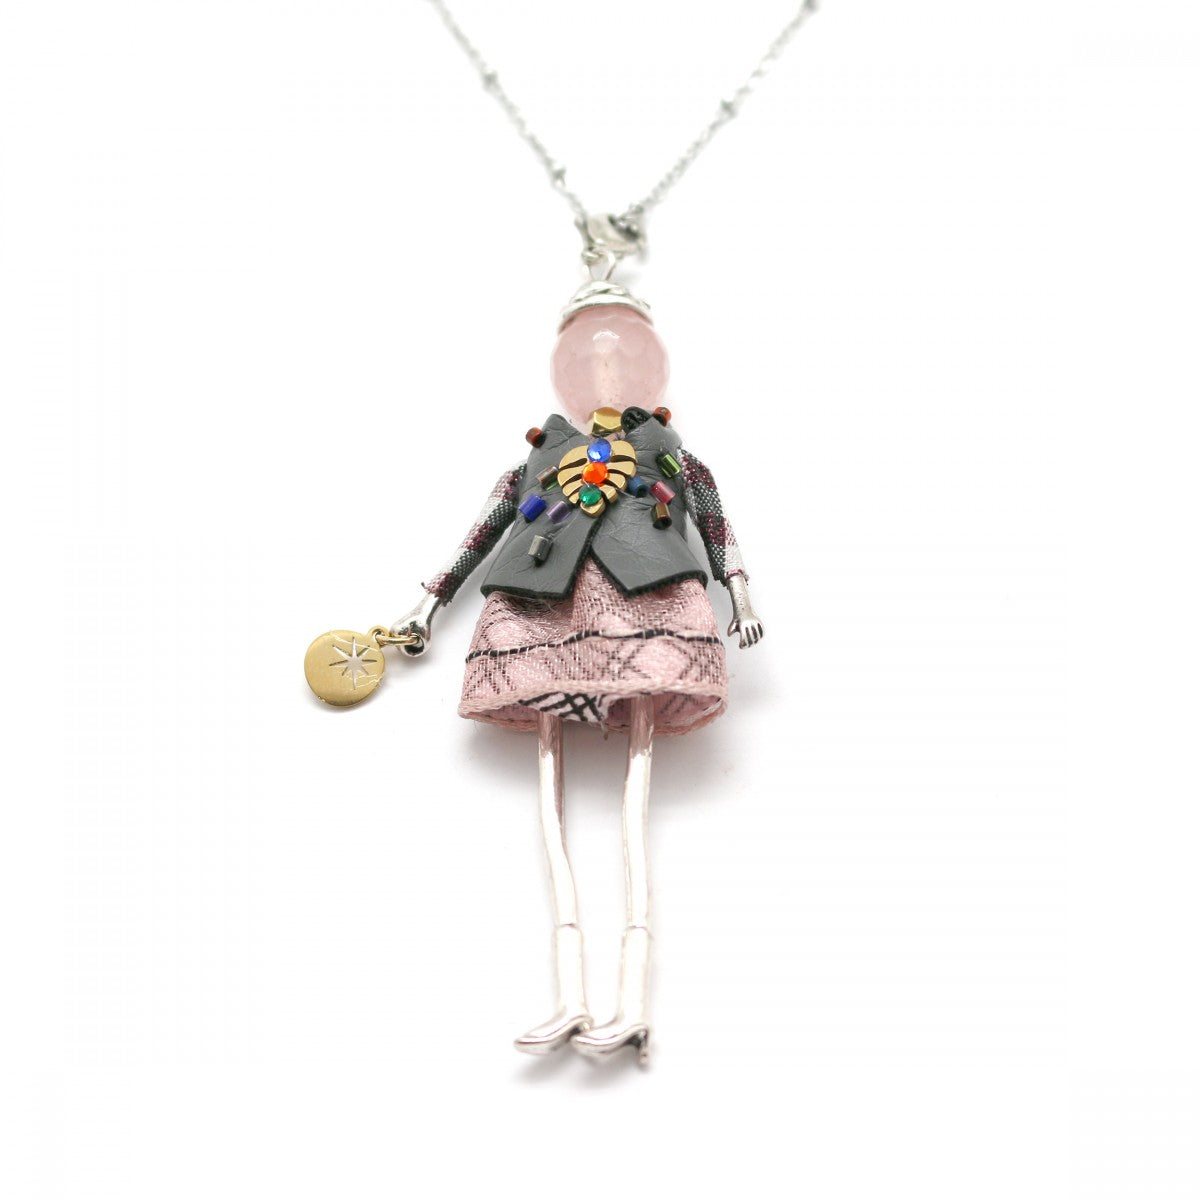 Moon C Pink Dress Doll Pendant Necklace